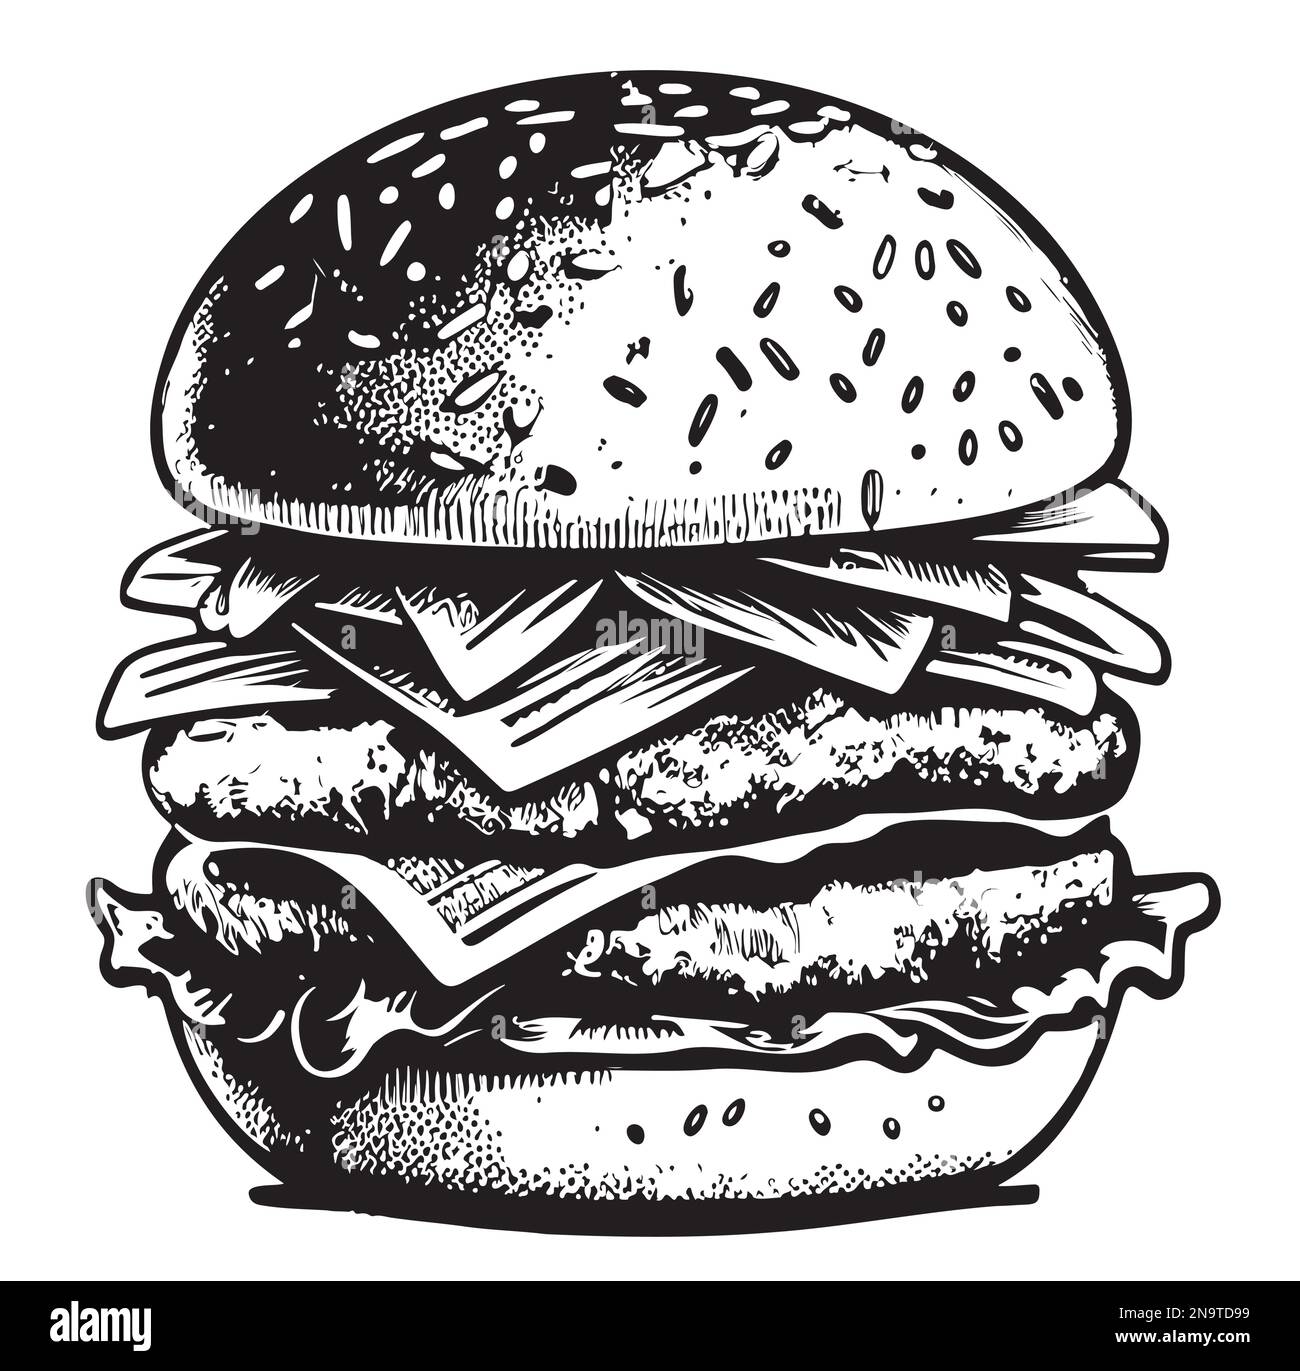 Double burger fast food hand drawn sketch illustration Stock Vector